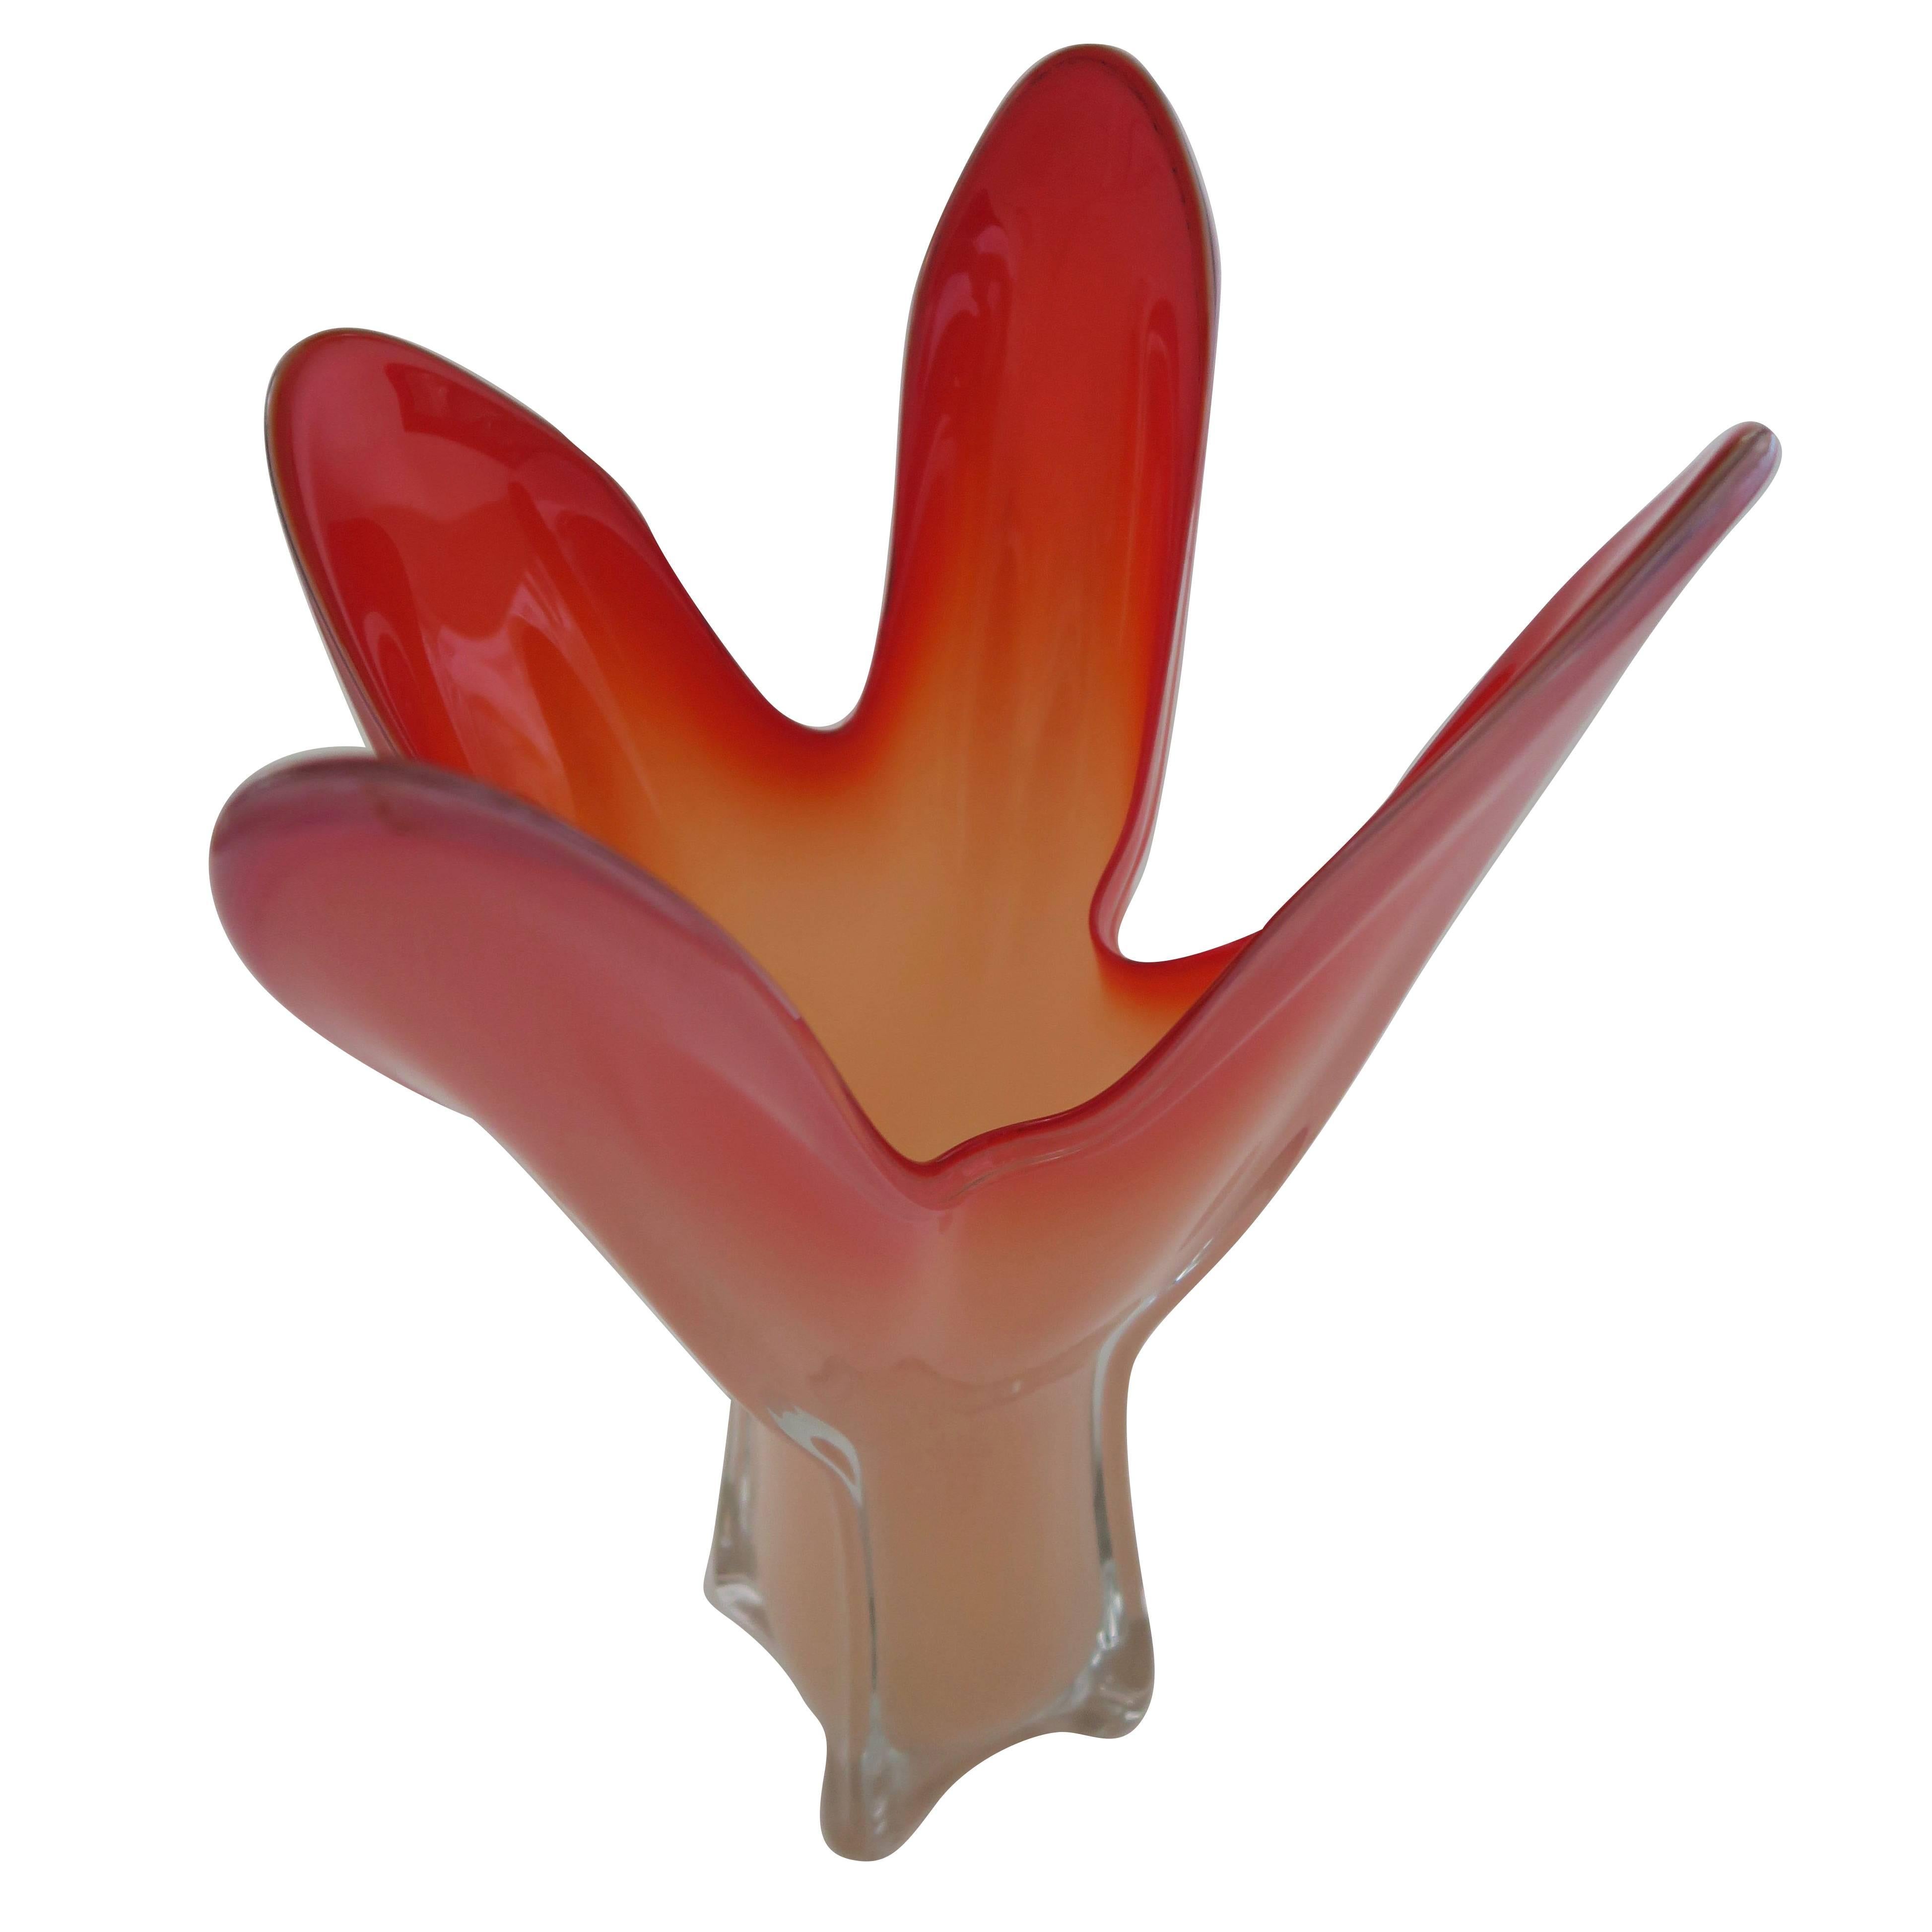 Big and spectacular Murano glasswork
Italy, circa 1960
Beautiful colors oscillating between the milky white and the intense coral red
Light asymmetry at the level of the four petals
Unique

Dimensions:
H 49 cm x W 35 cm
Base: 12 cm x 11